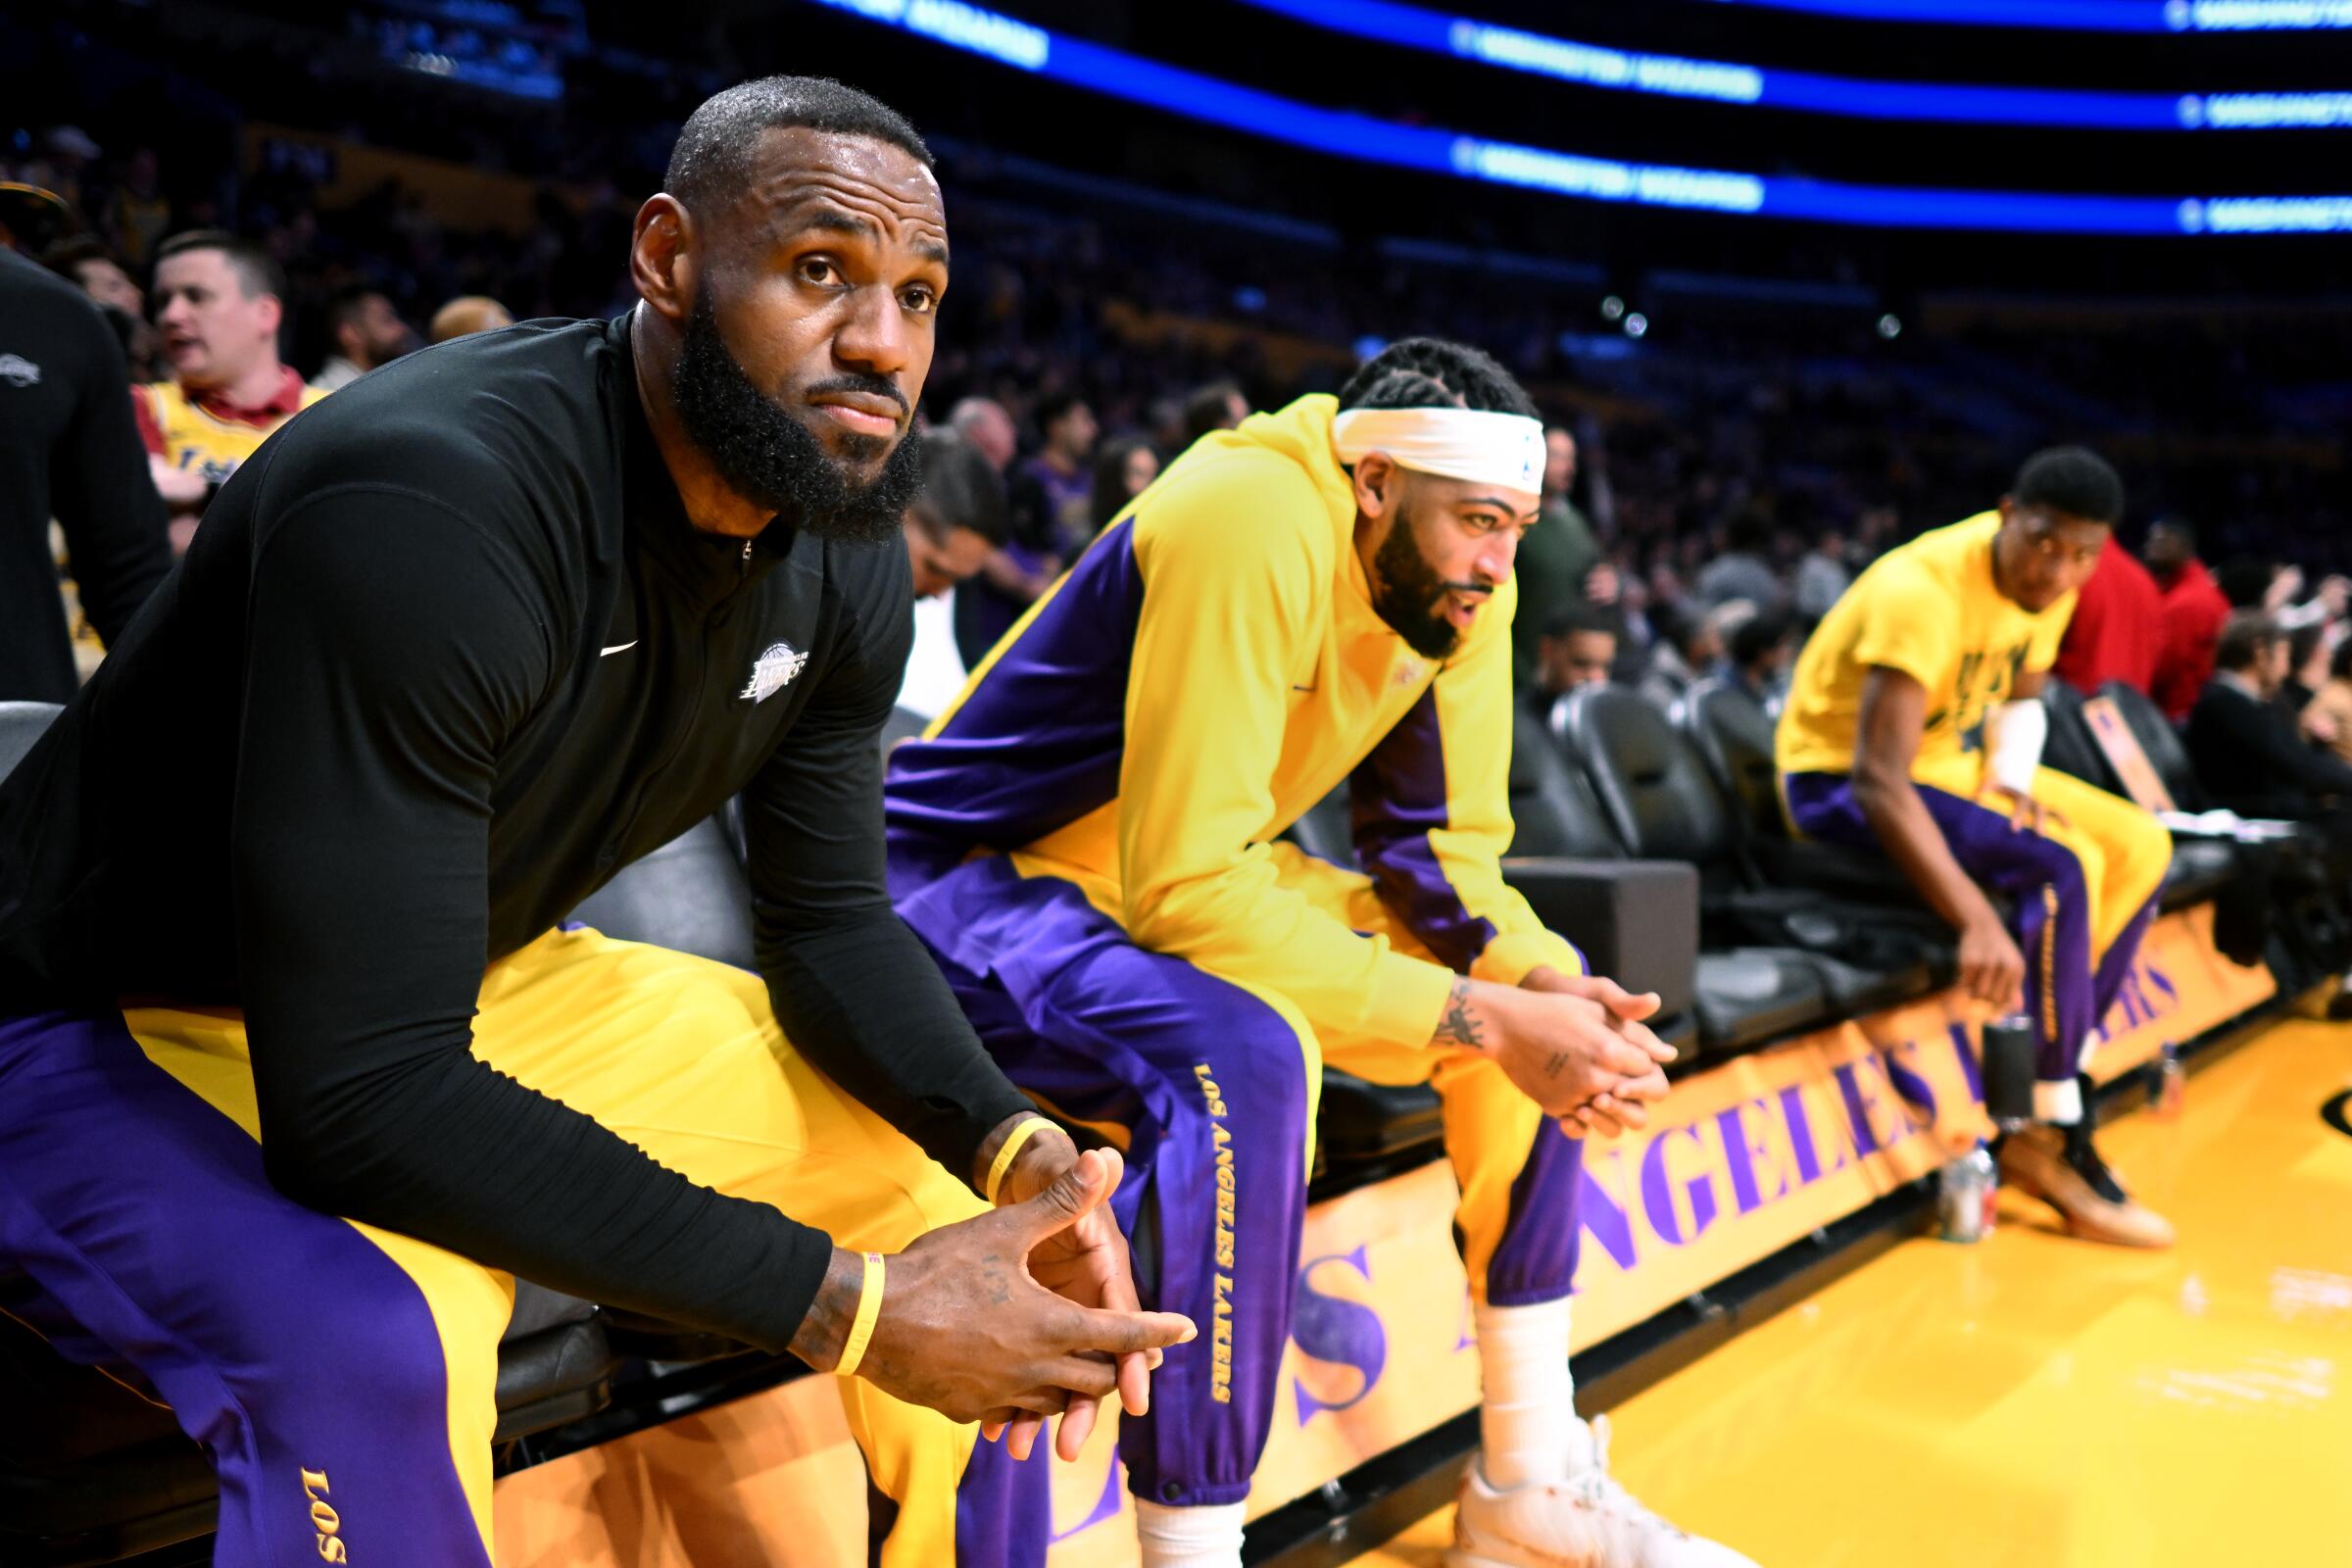 Lakers stars LeBron James, left, and Anthony Davis sit on the bench before player introductions.